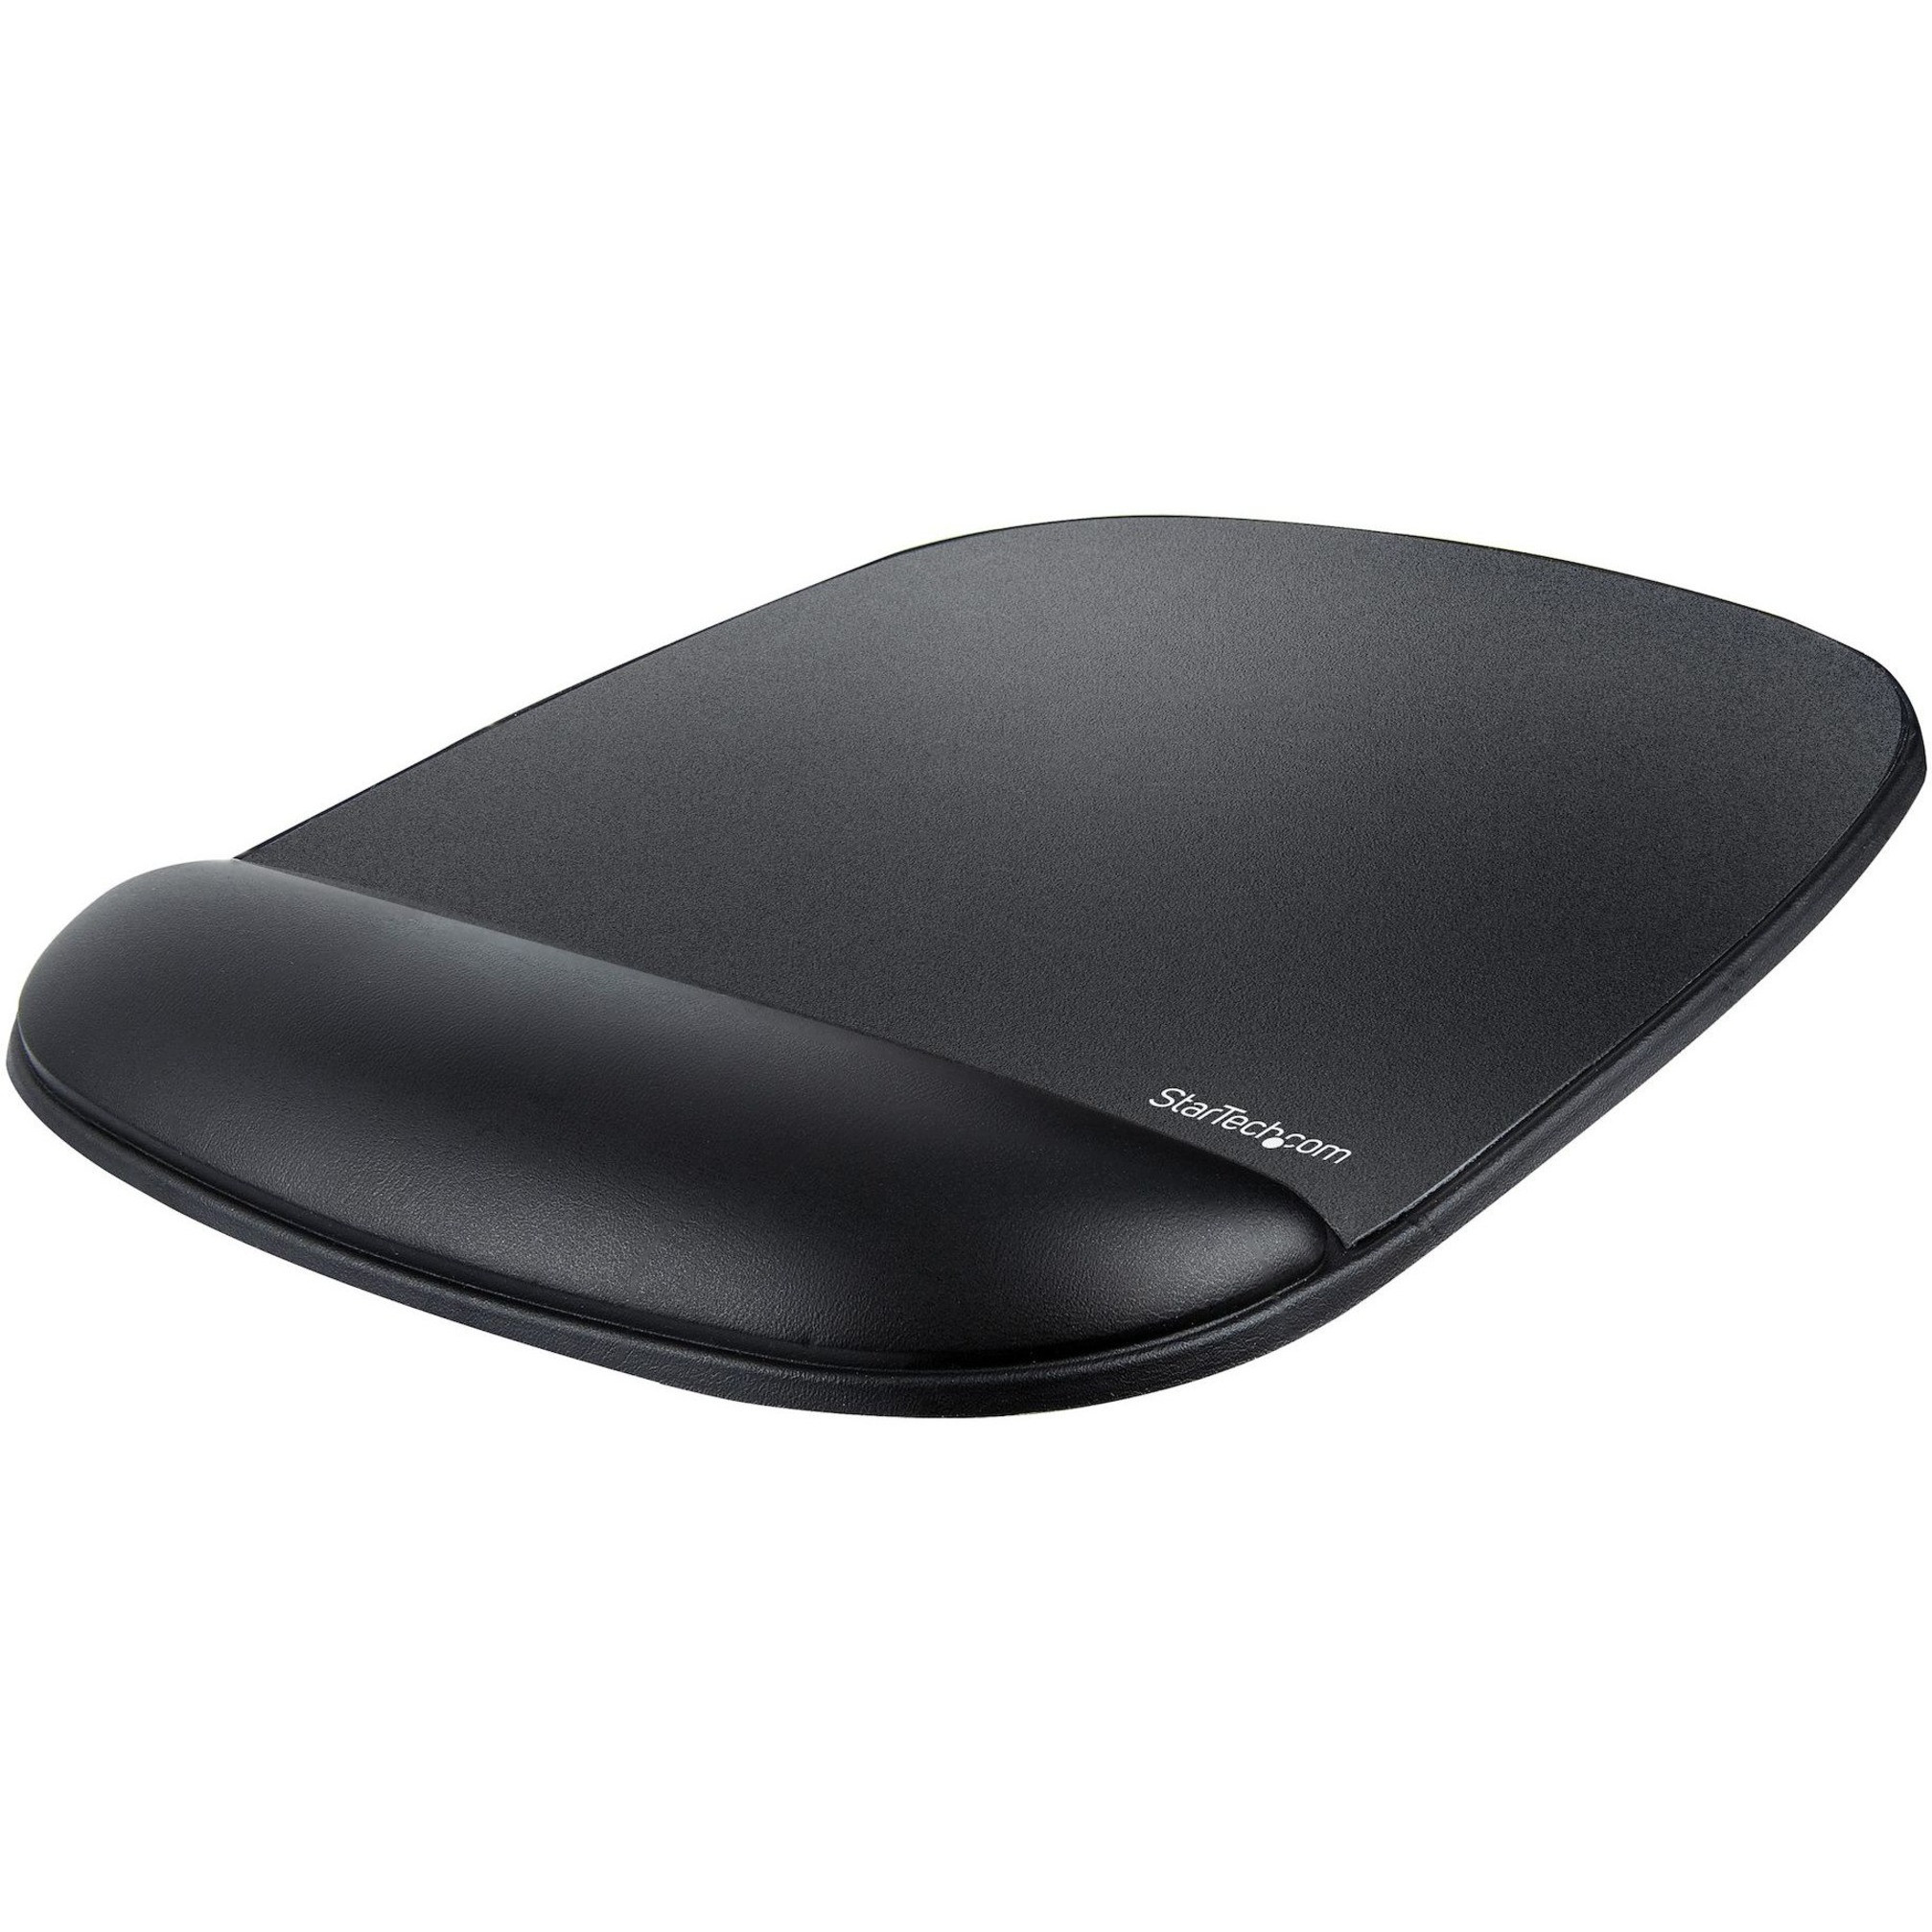 Startech .com Mouse Pad with Hand rest, 6.7x7.1x 0.8in (17x18x2cm